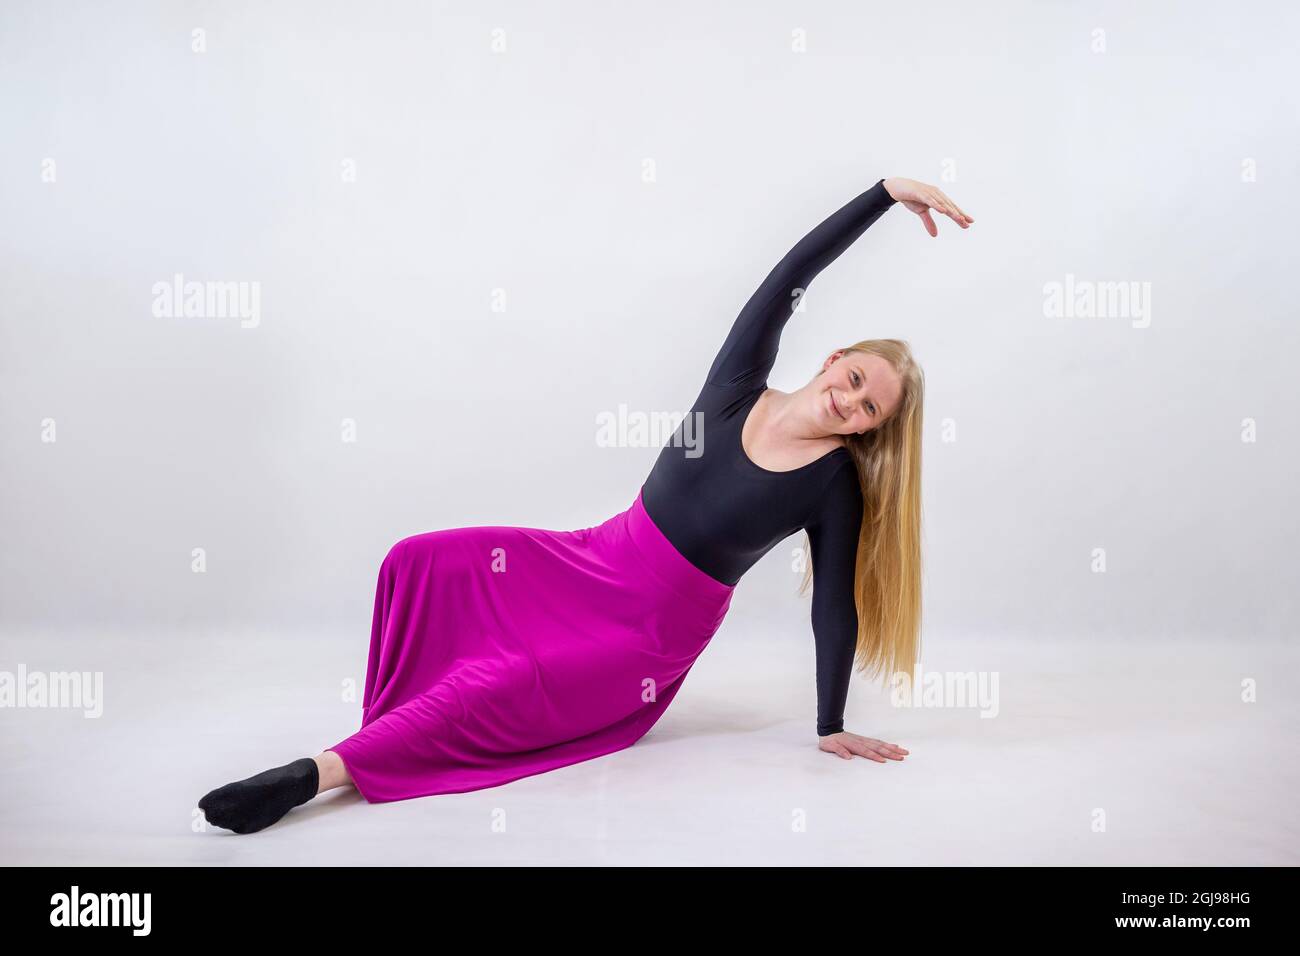 Young blonde blue-eyed dancer woman in long purple skirt on white background Stock Photo